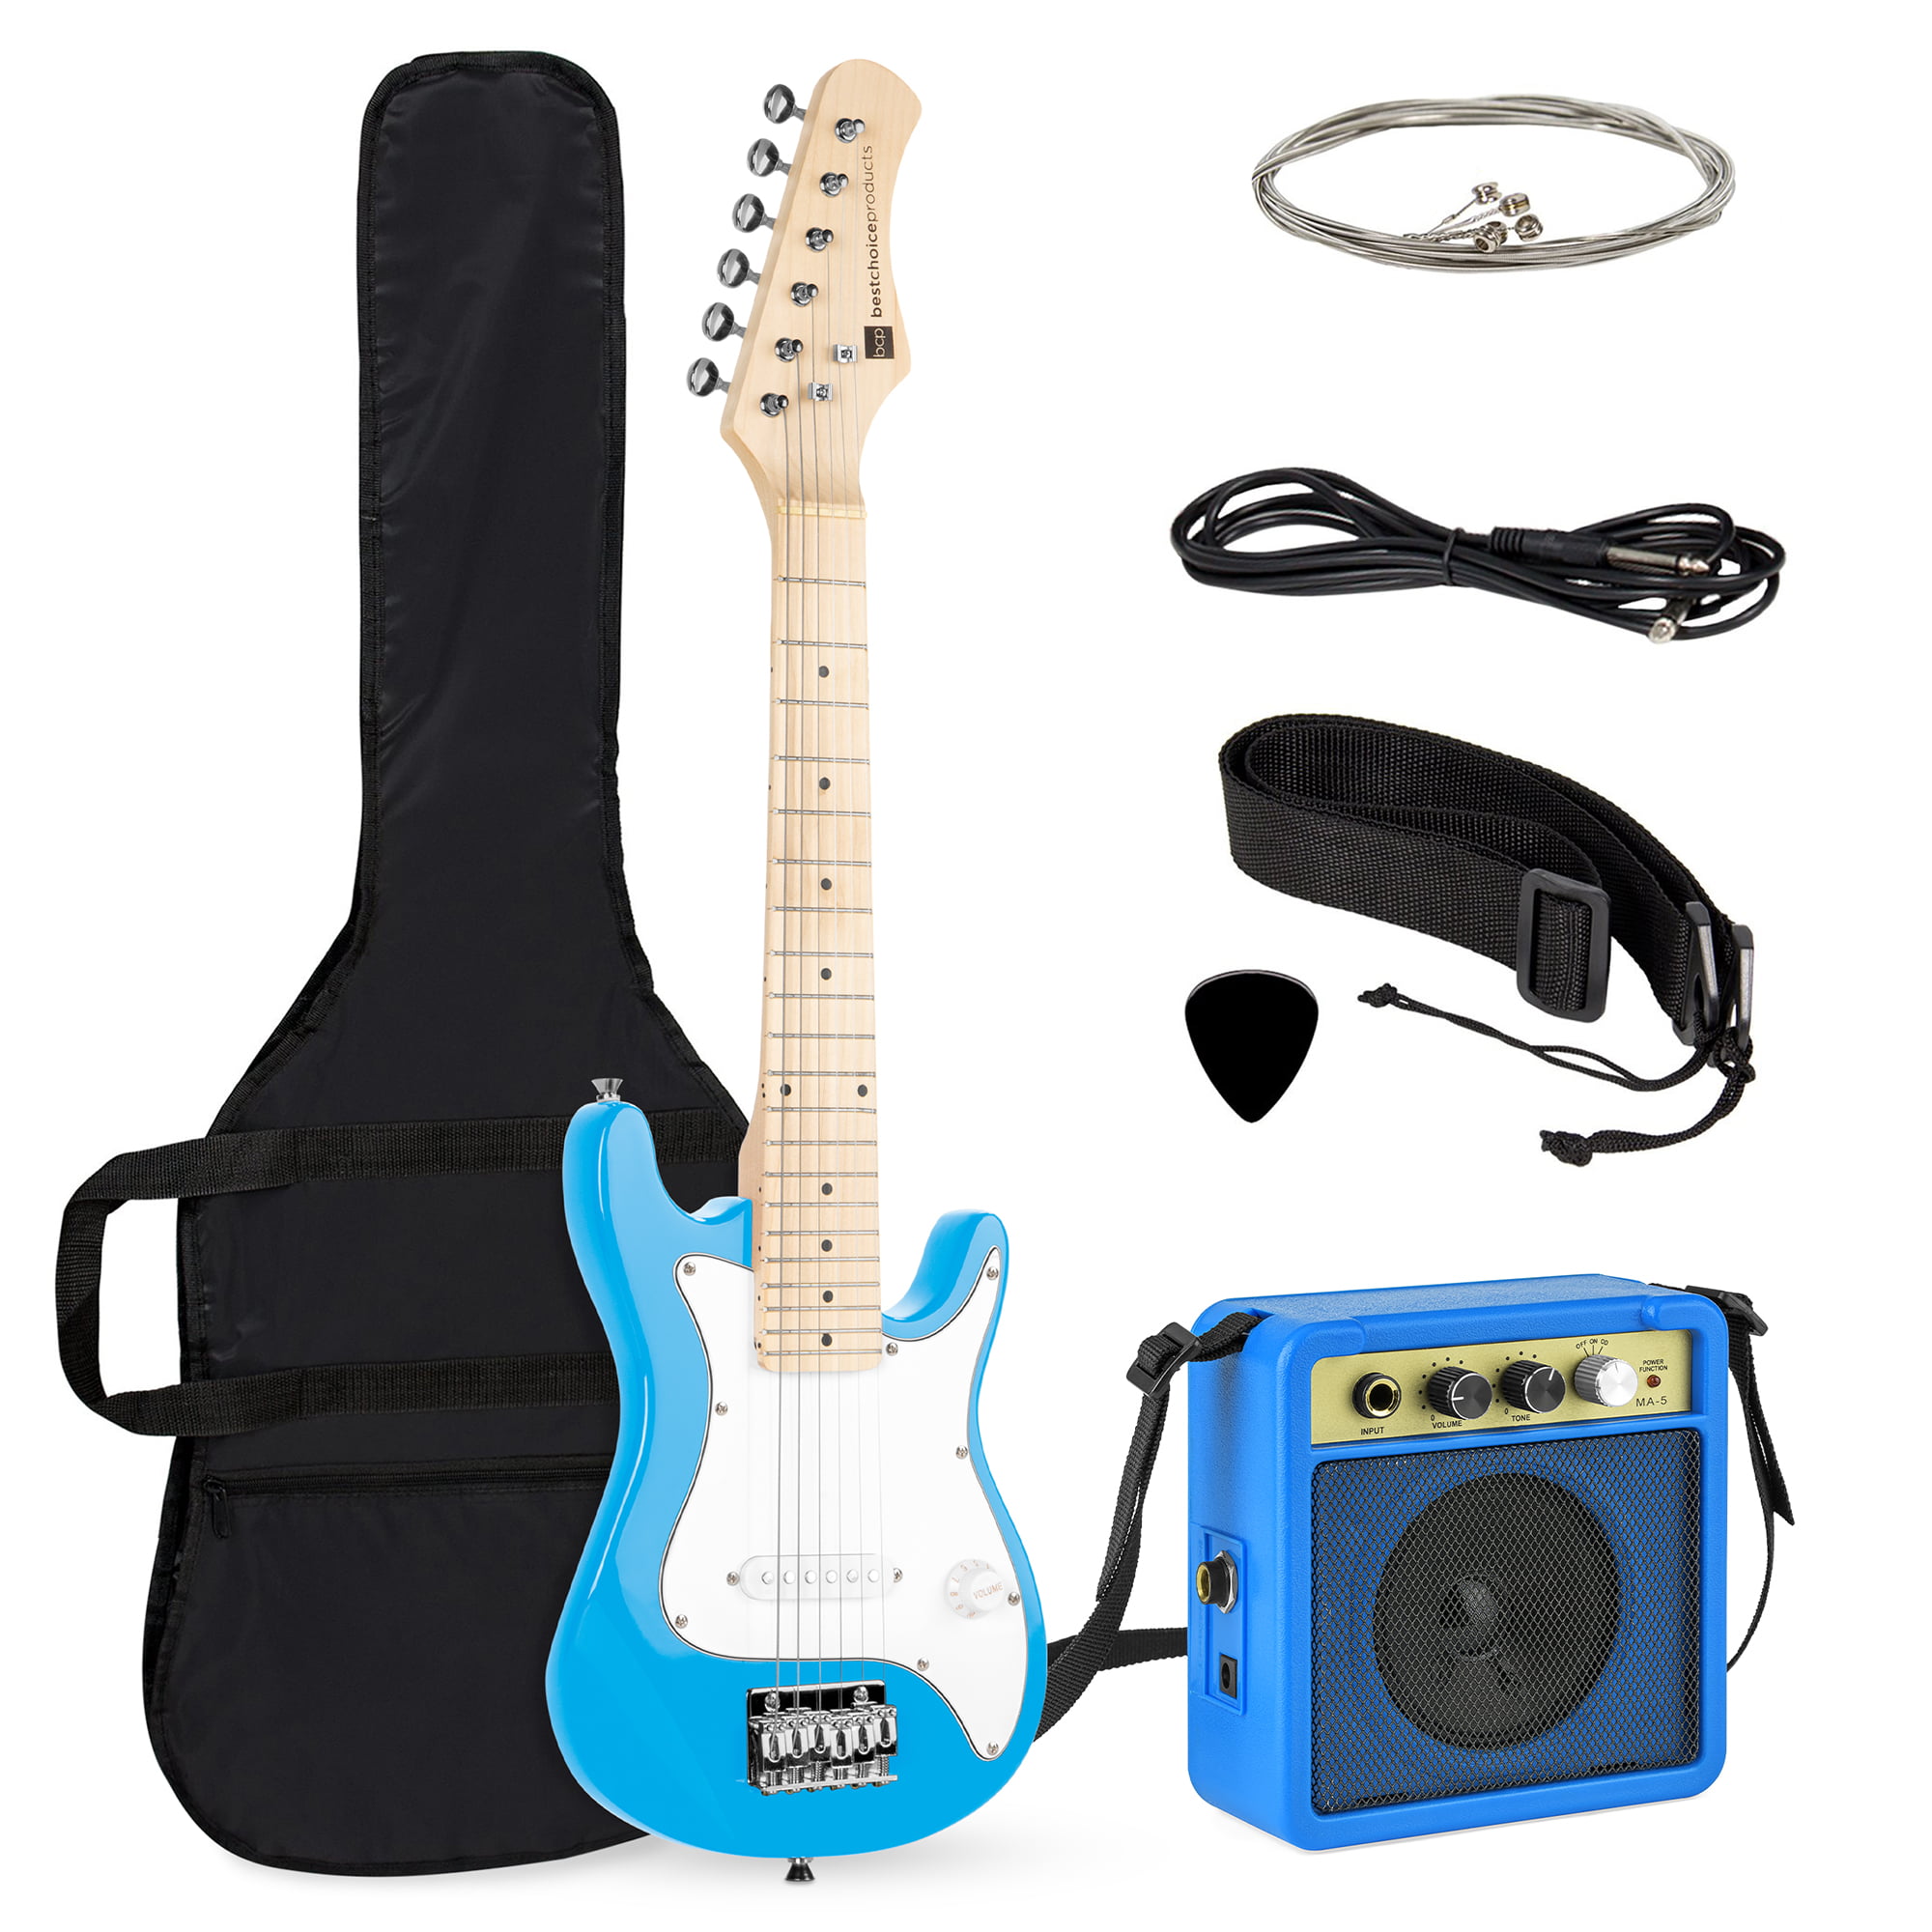 Zeny 30 inch Kids Electric Guitar with 5W Amp, Gig Bag, Strap, Cable, Strings and Picks Guitar Combo Accessory Kit, Blue